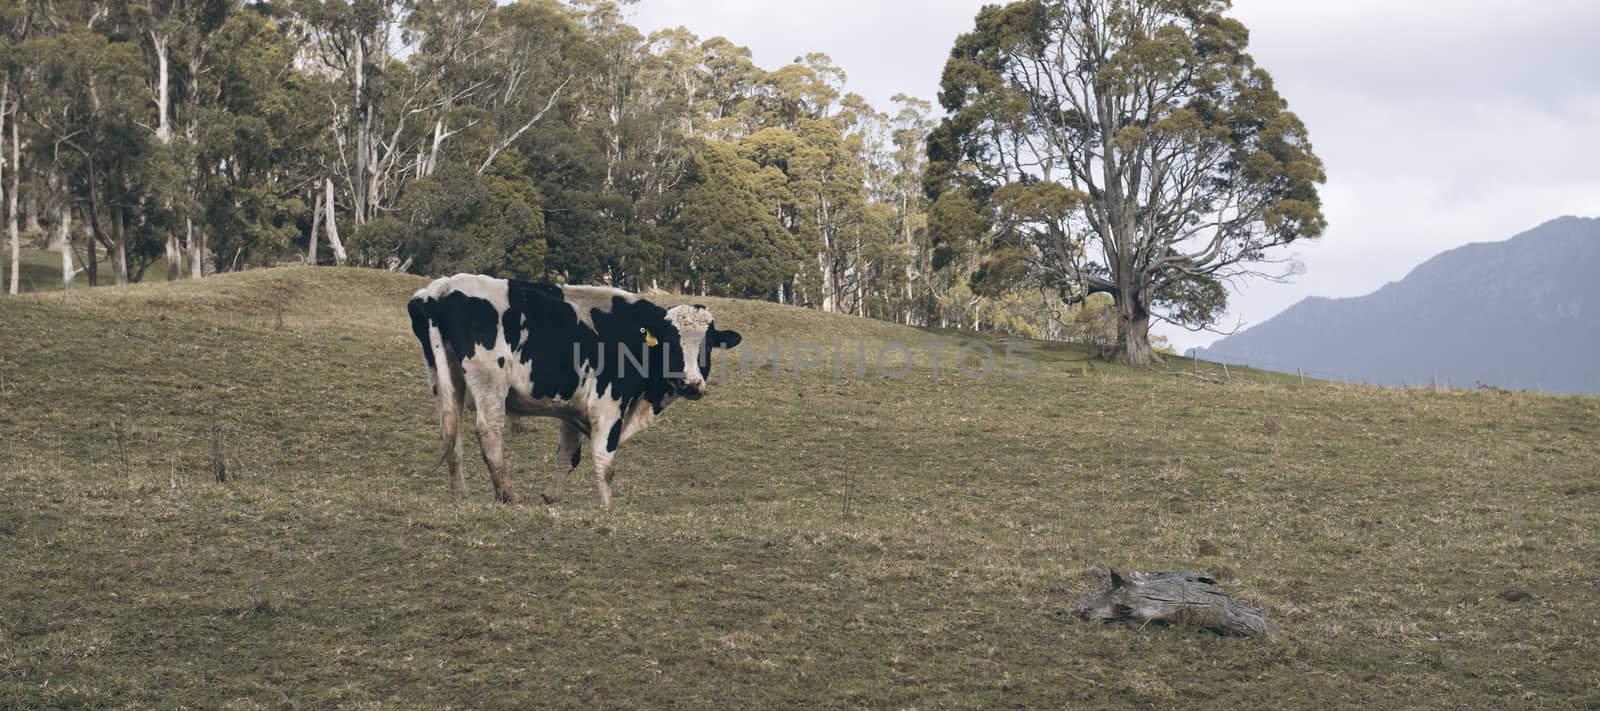 Holstein Fresian cow out in the paddock during the day in Tasmania, Australia